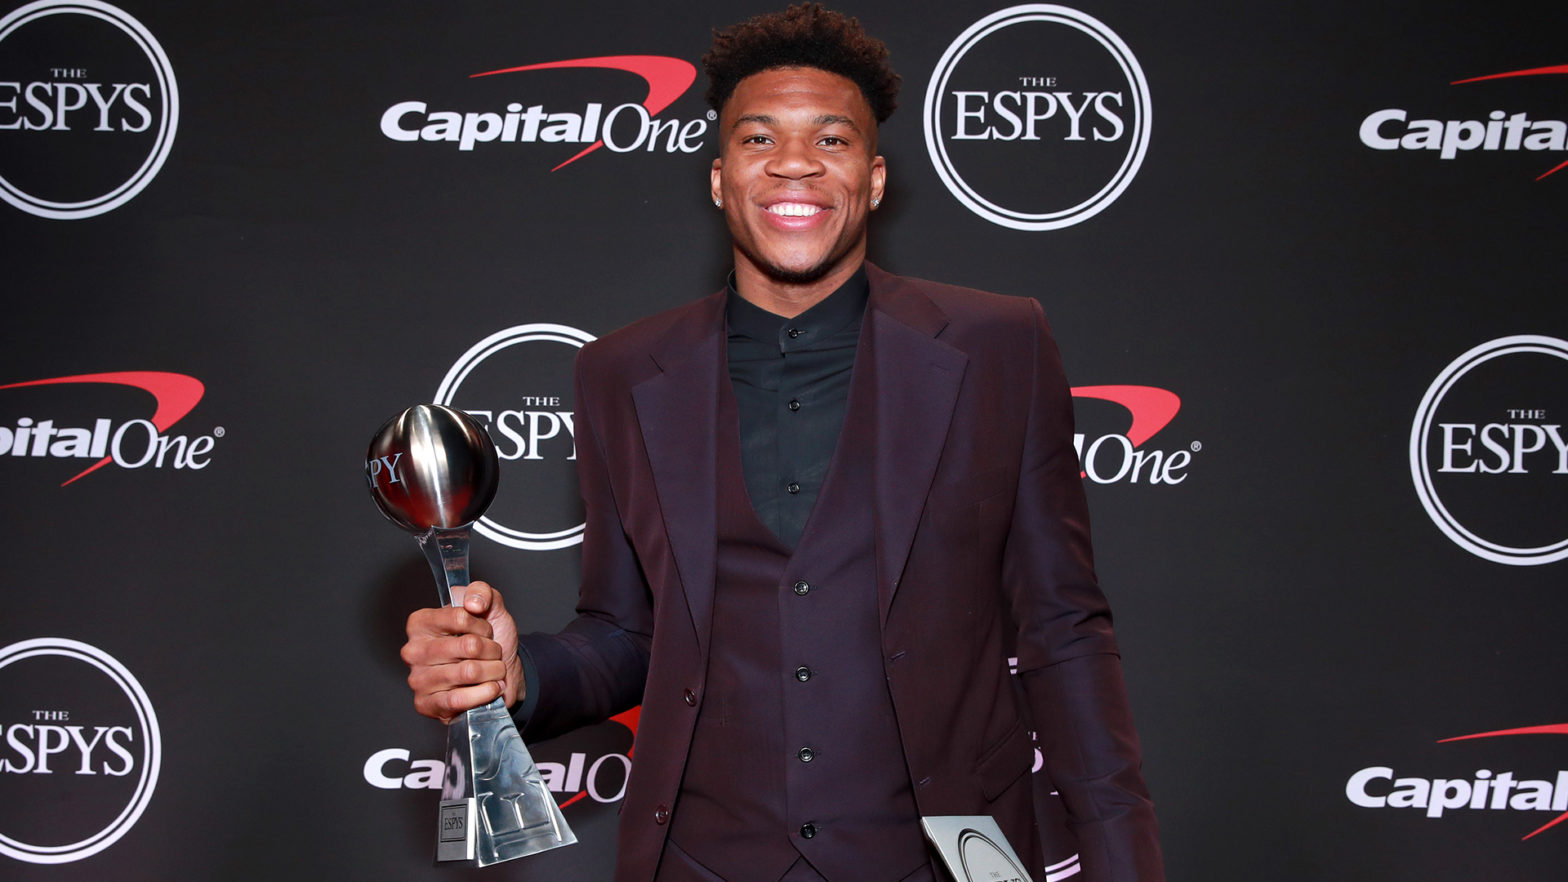 'This Is Me Doing Something About It' — Giannis Antetokounmpo Has Made A $1M Investment In An Effort To Make Healthcare Accessible